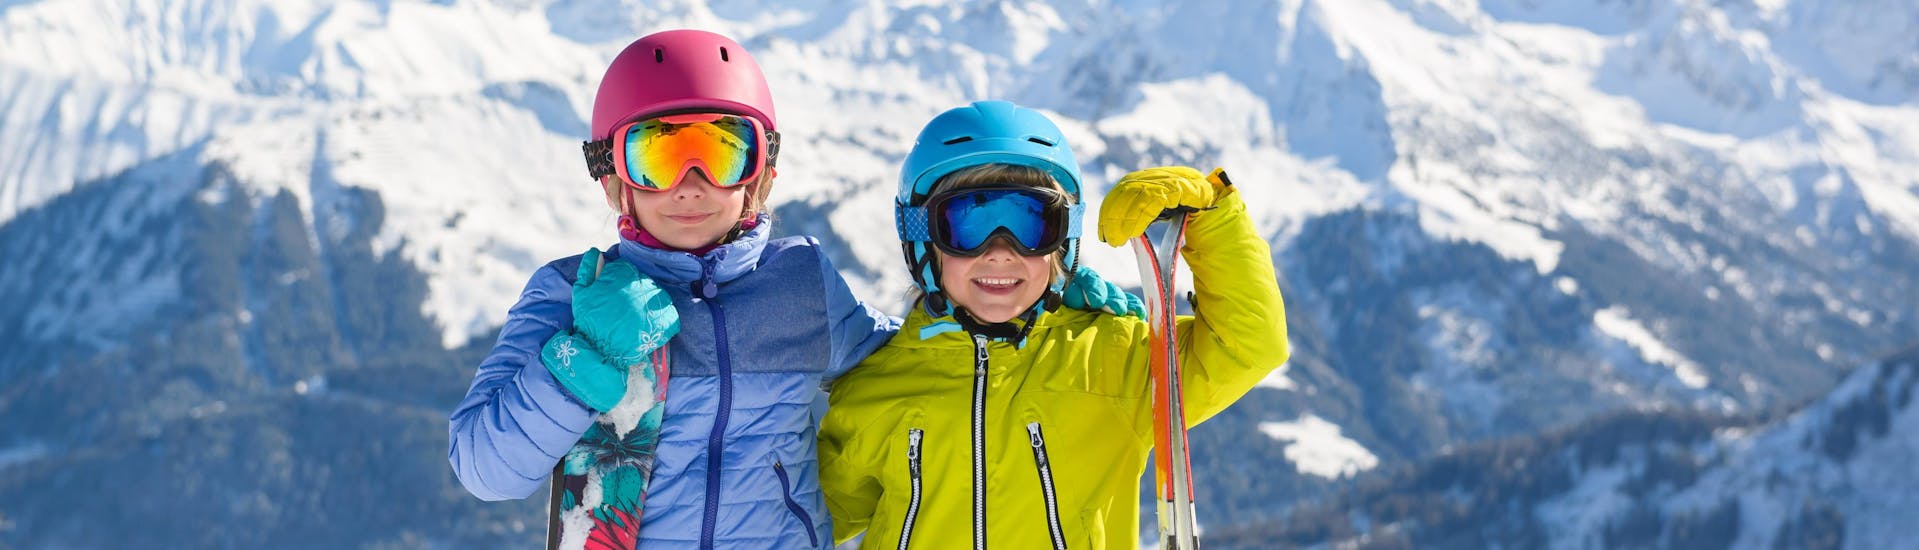 Two children in full skiing gear are smiling at the camera as they prepare for their kids ski lessons in Sainte-Foy-Tarentaise.